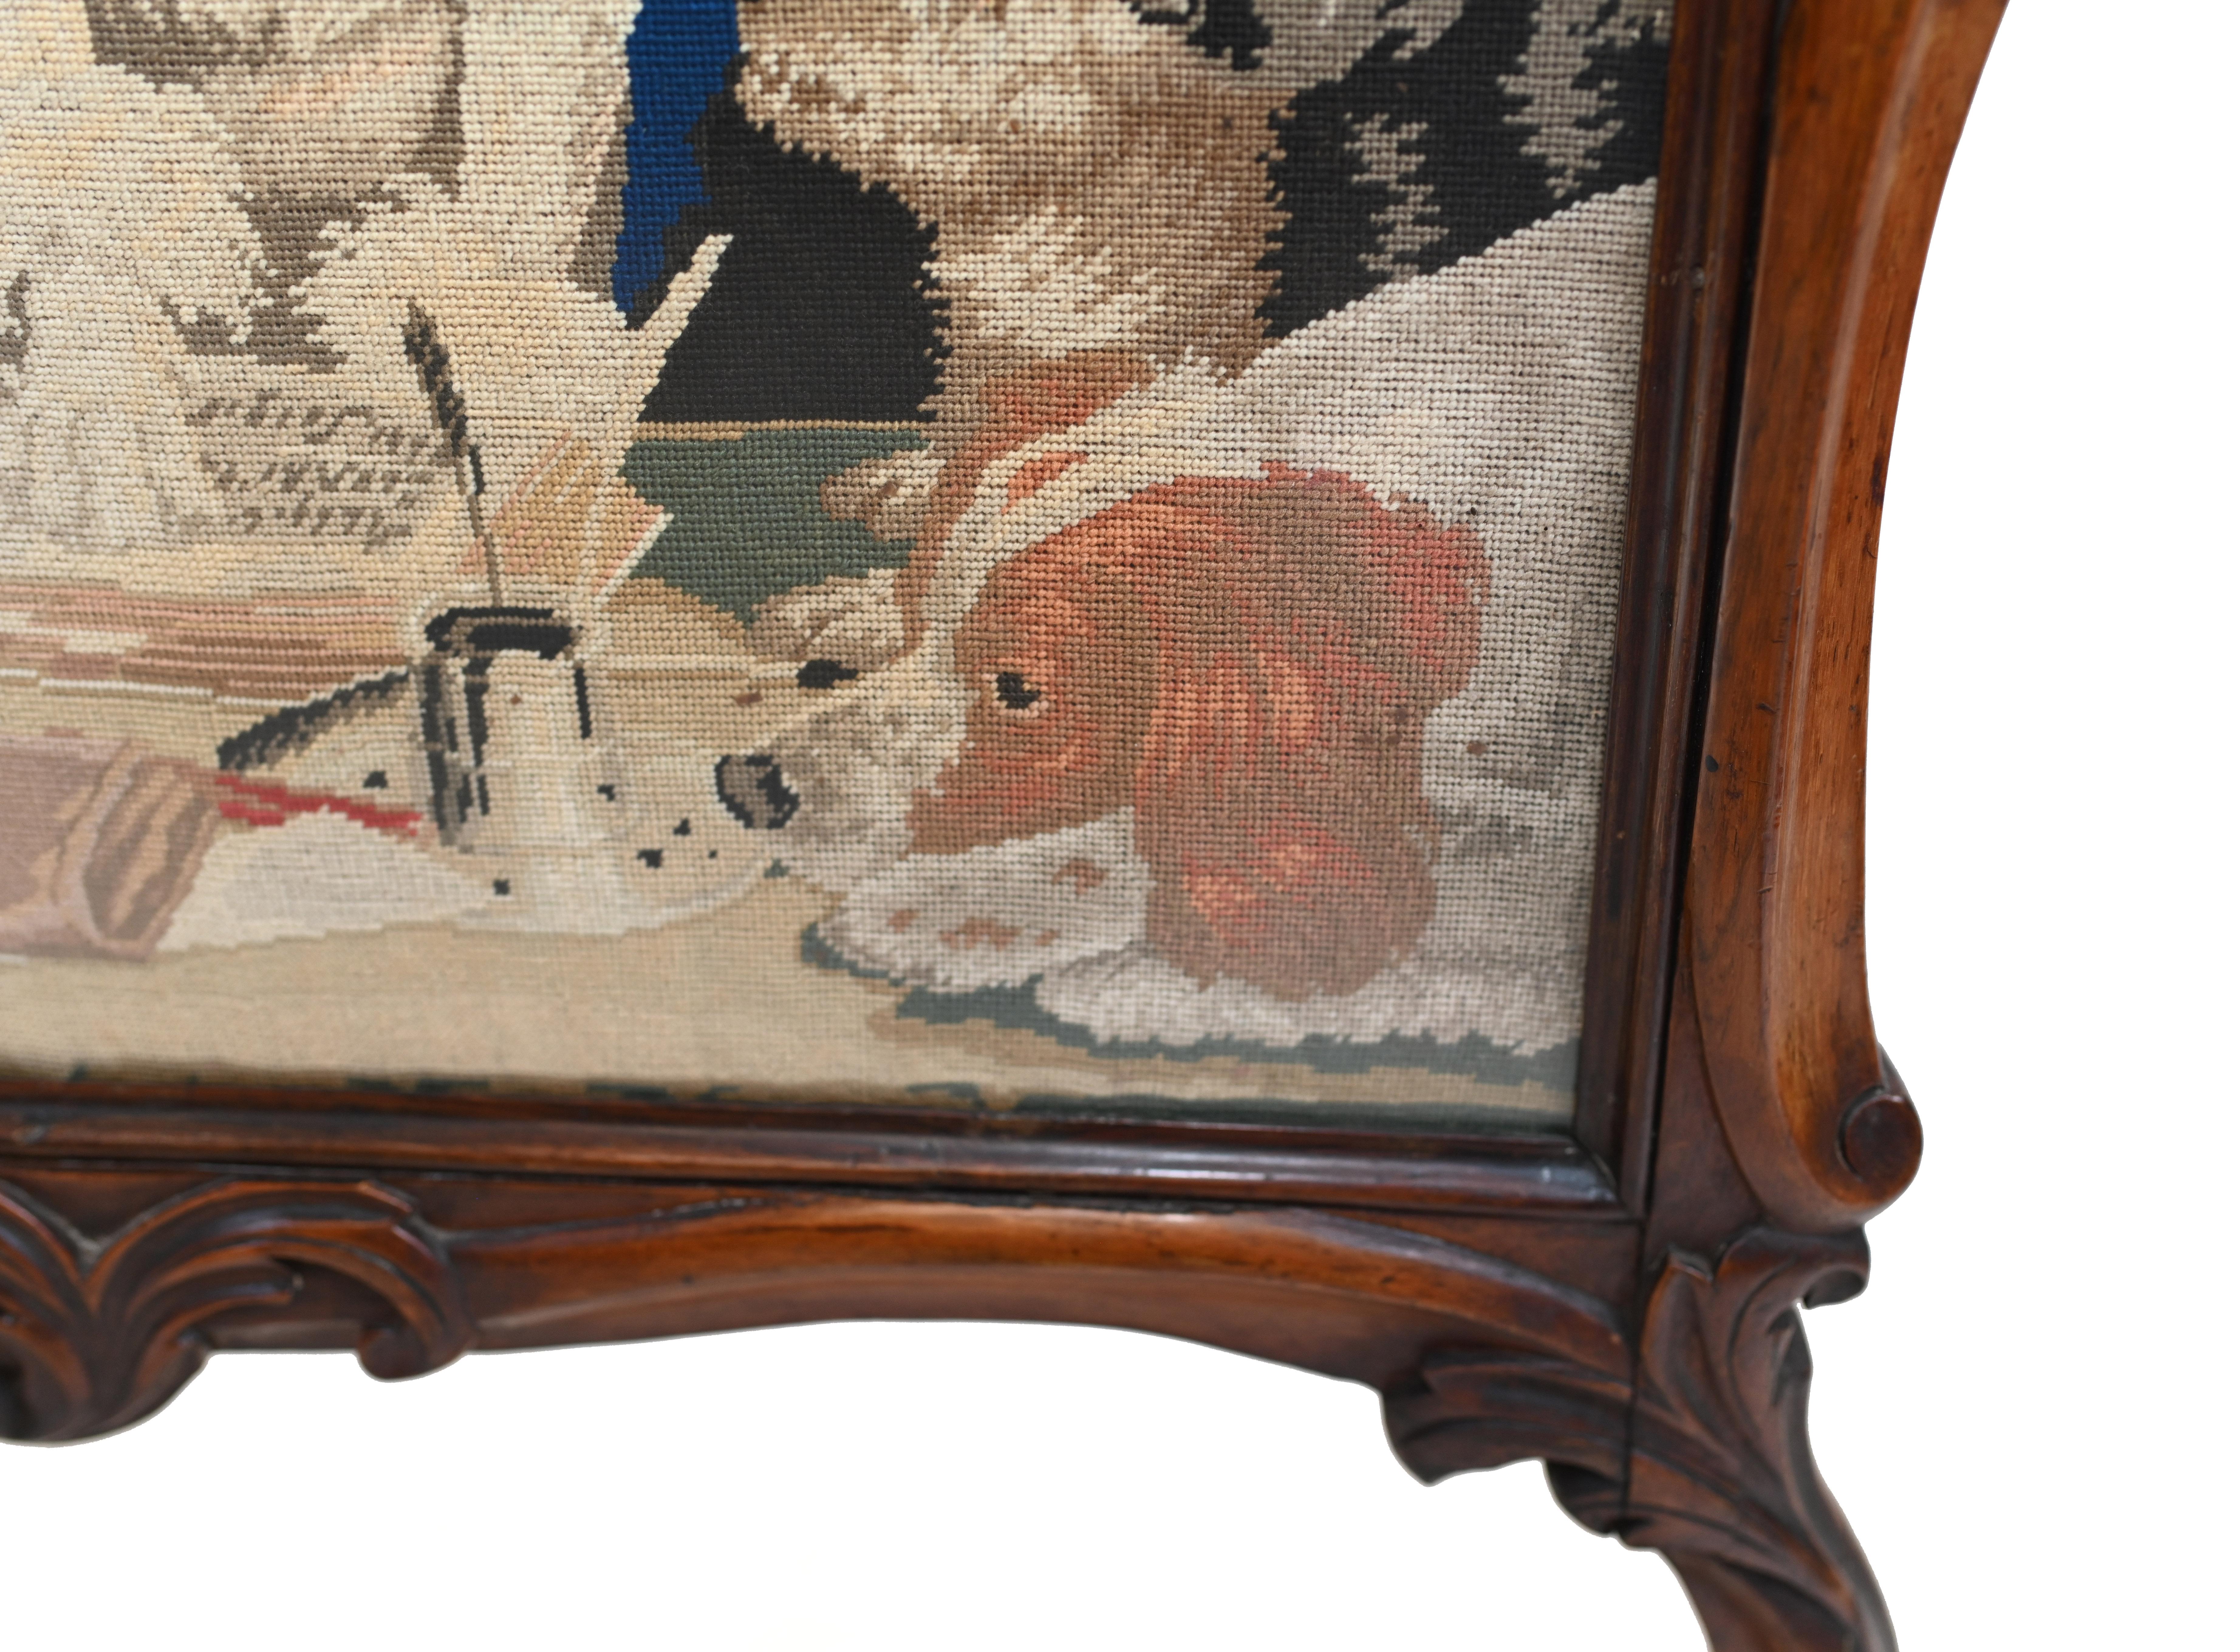 Mahogany Dog Needlepoint Tapestry Screen Trial By Jury by Landseer Chatsworth